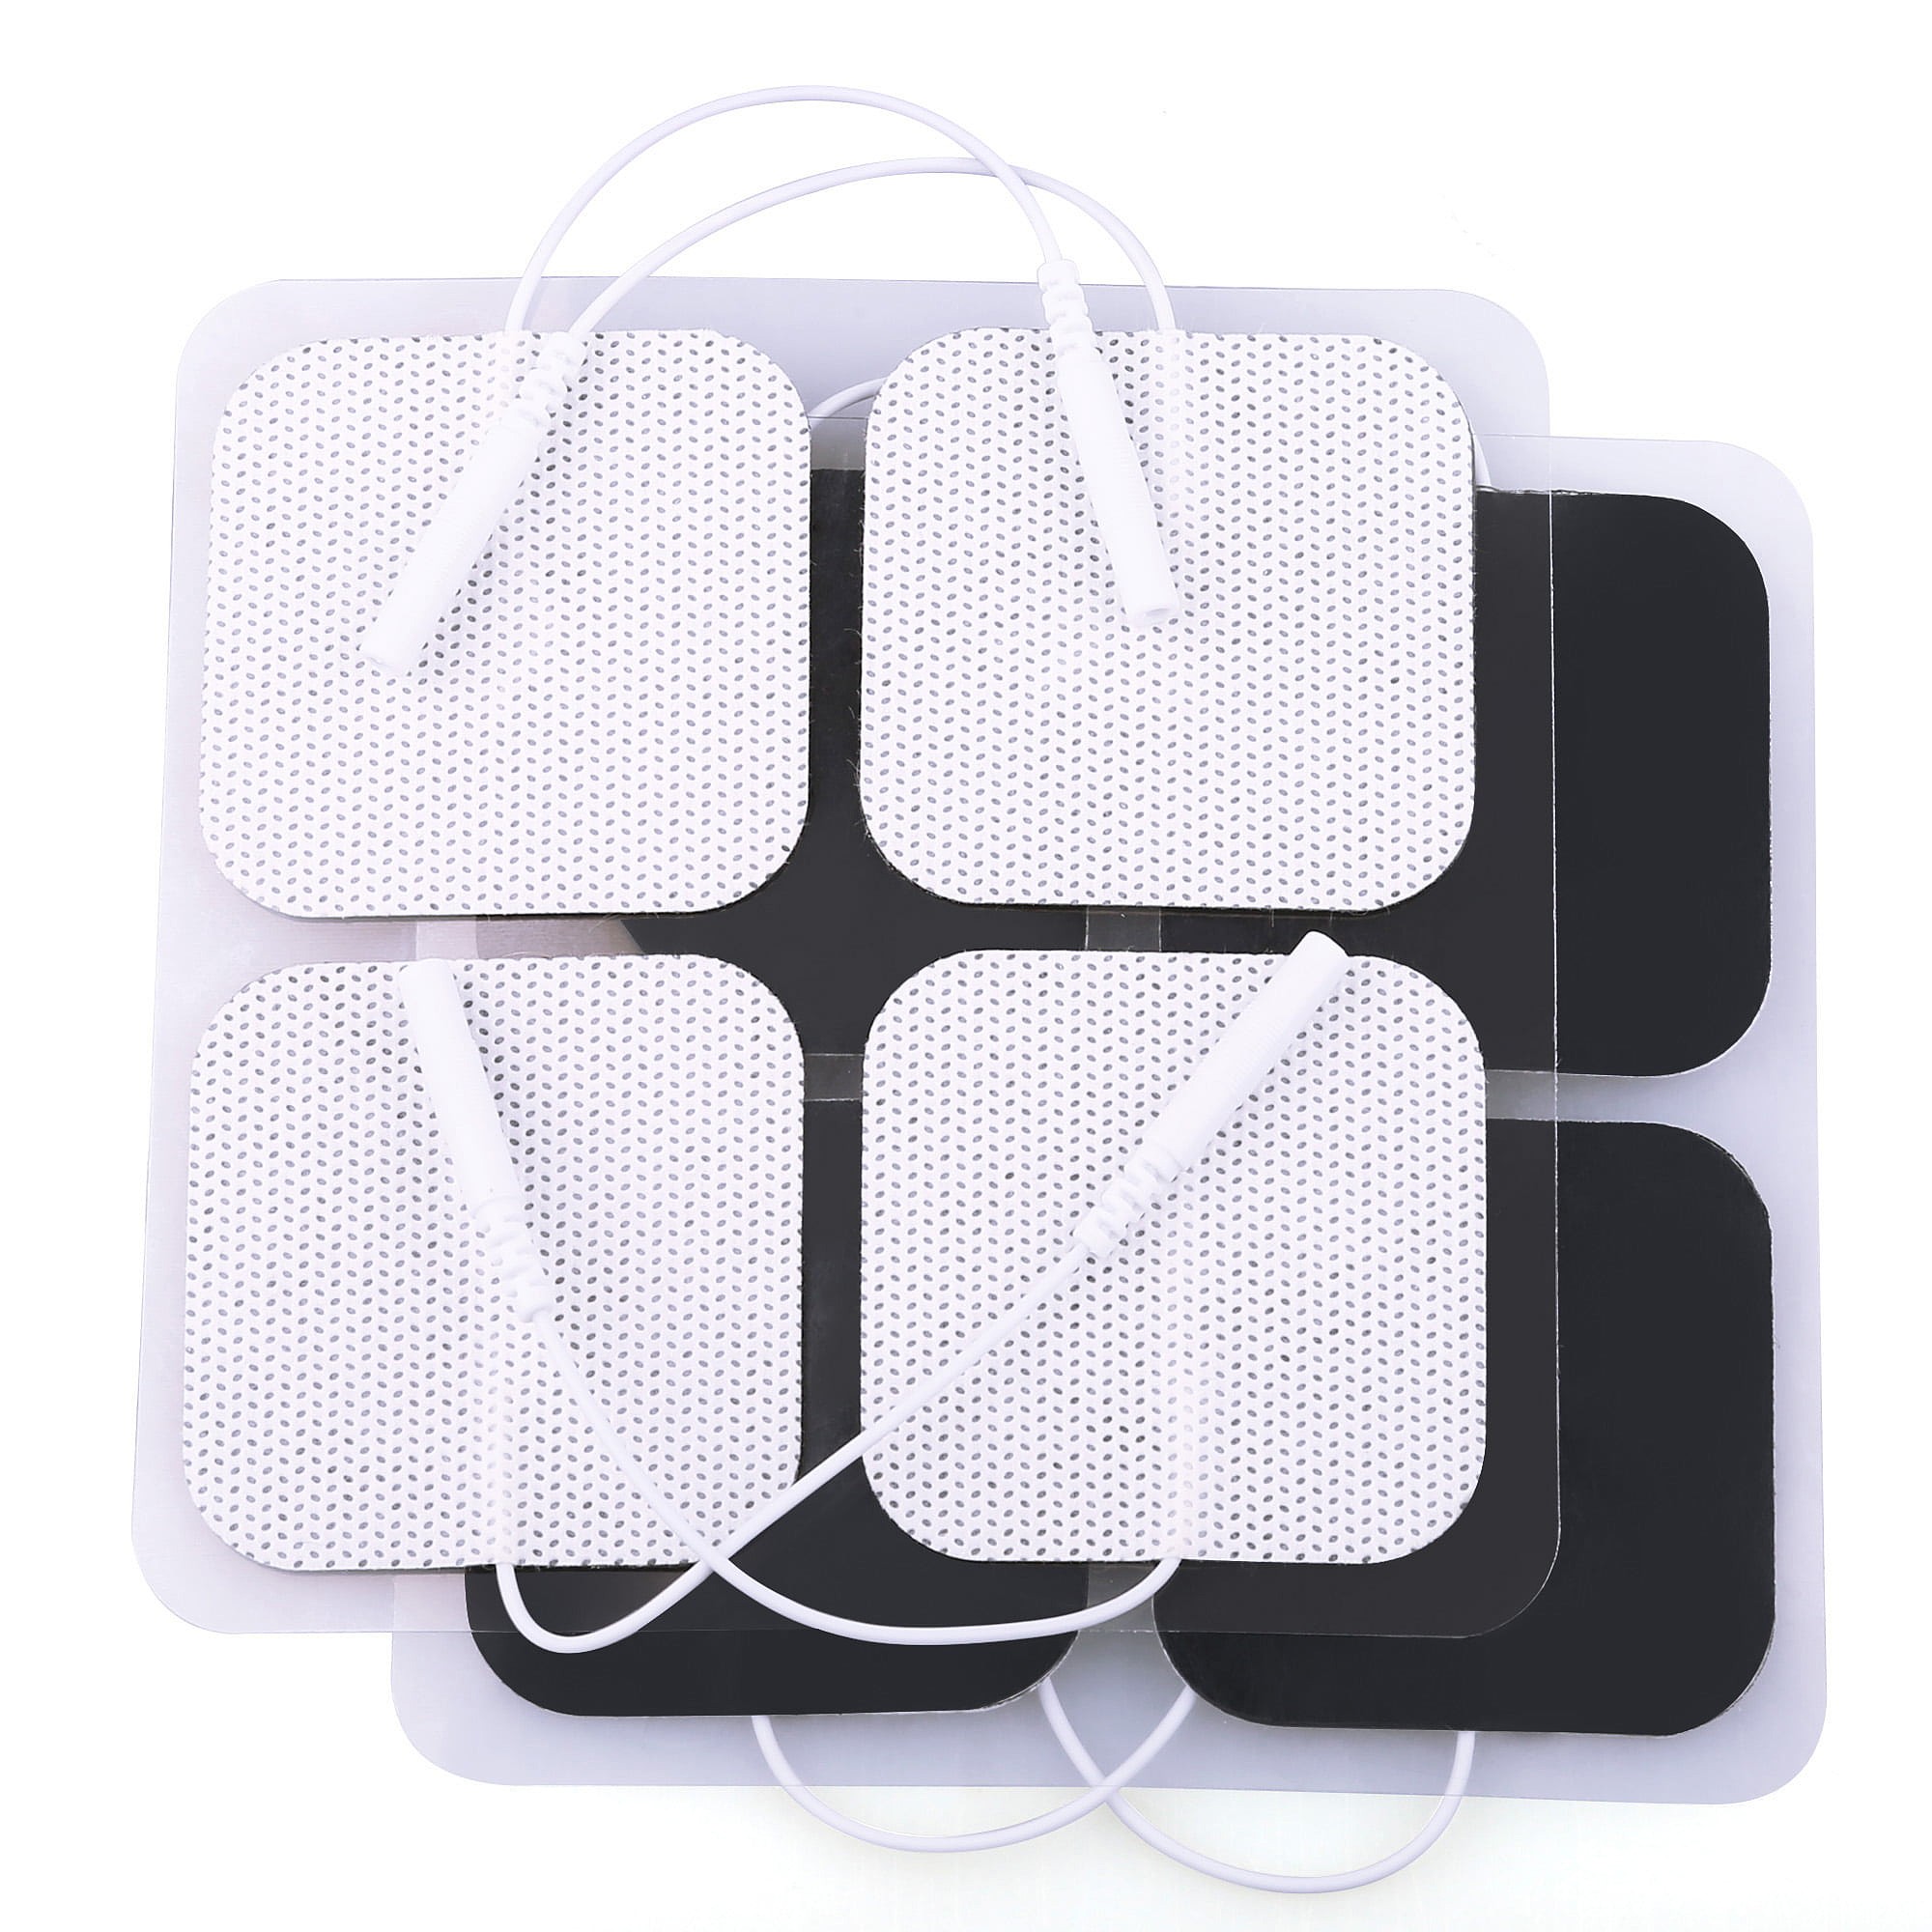 Replacement Self-Adhesive Electrode Gel Pads for TENS Unit EM50/CEM50, –  Beurer North America